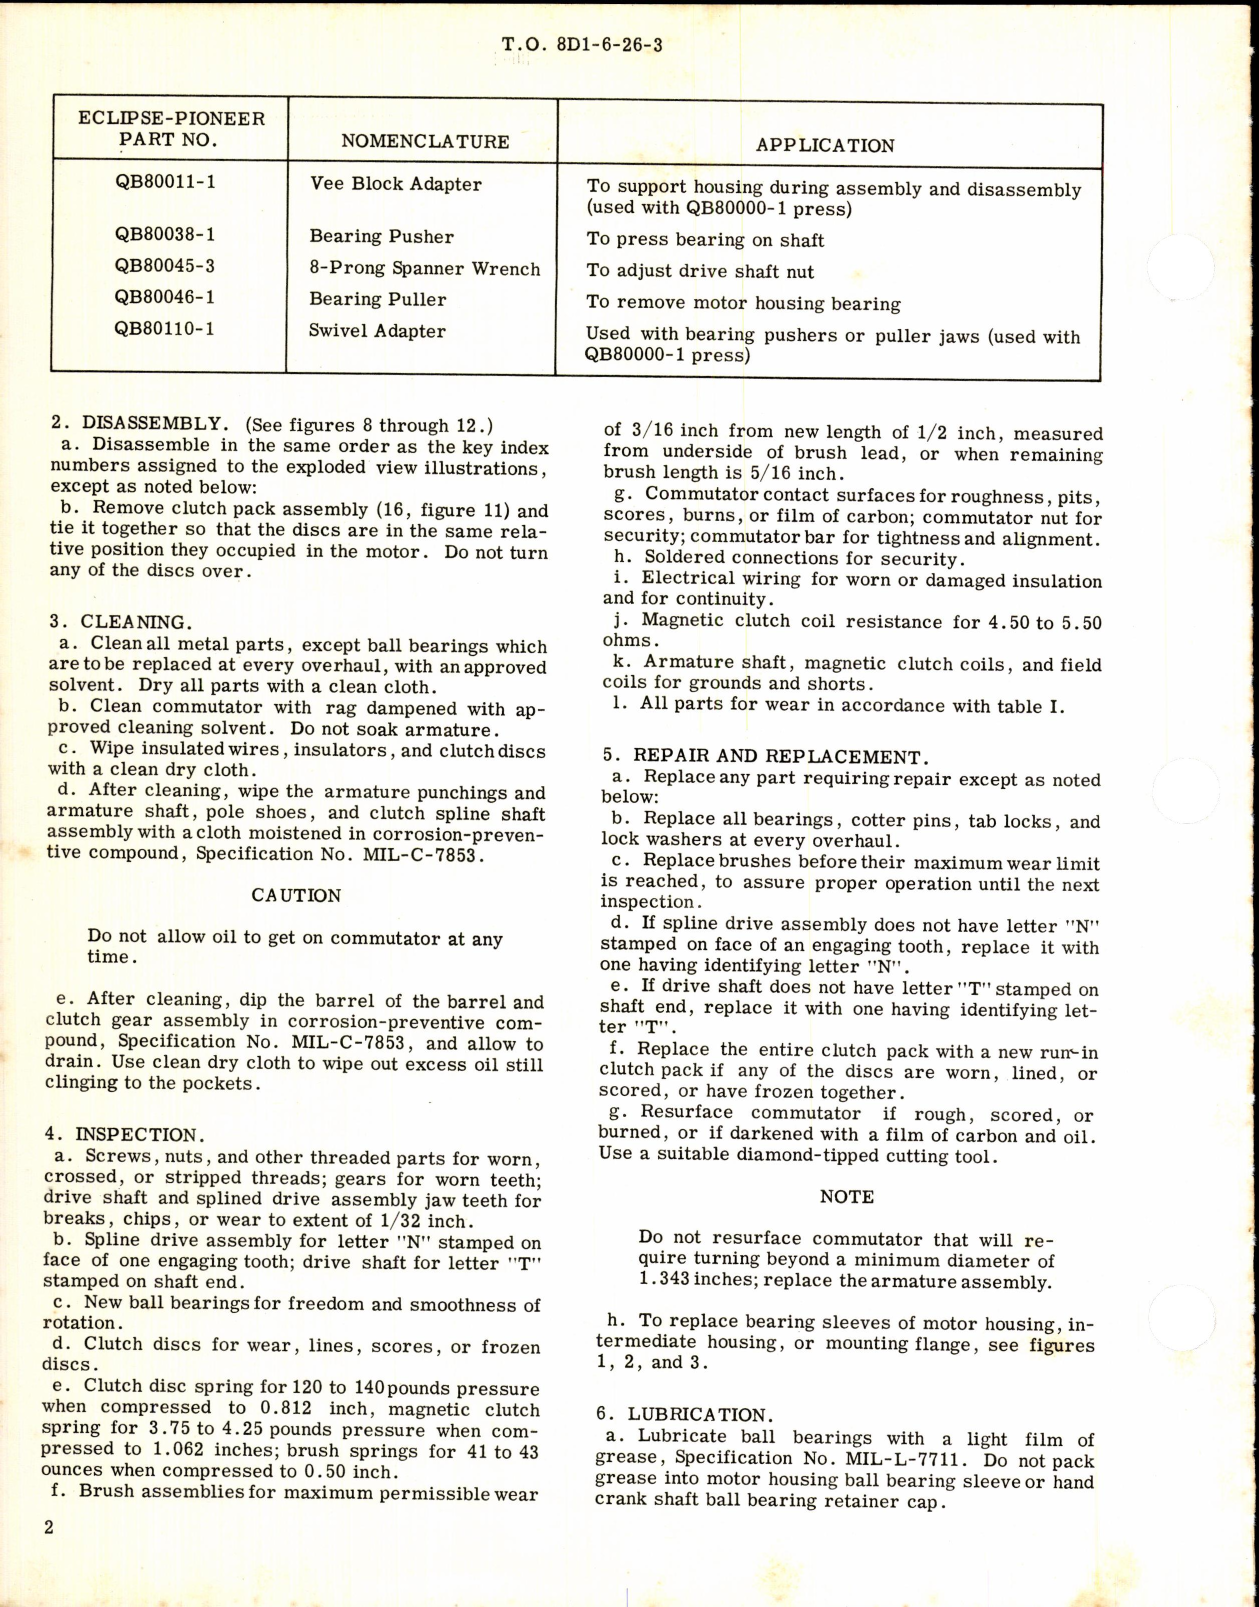 Sample page 2 from AirCorps Library document: Overhaul Instructions with Parts Breakdown for Retracting Motor Part No 1227-1-B